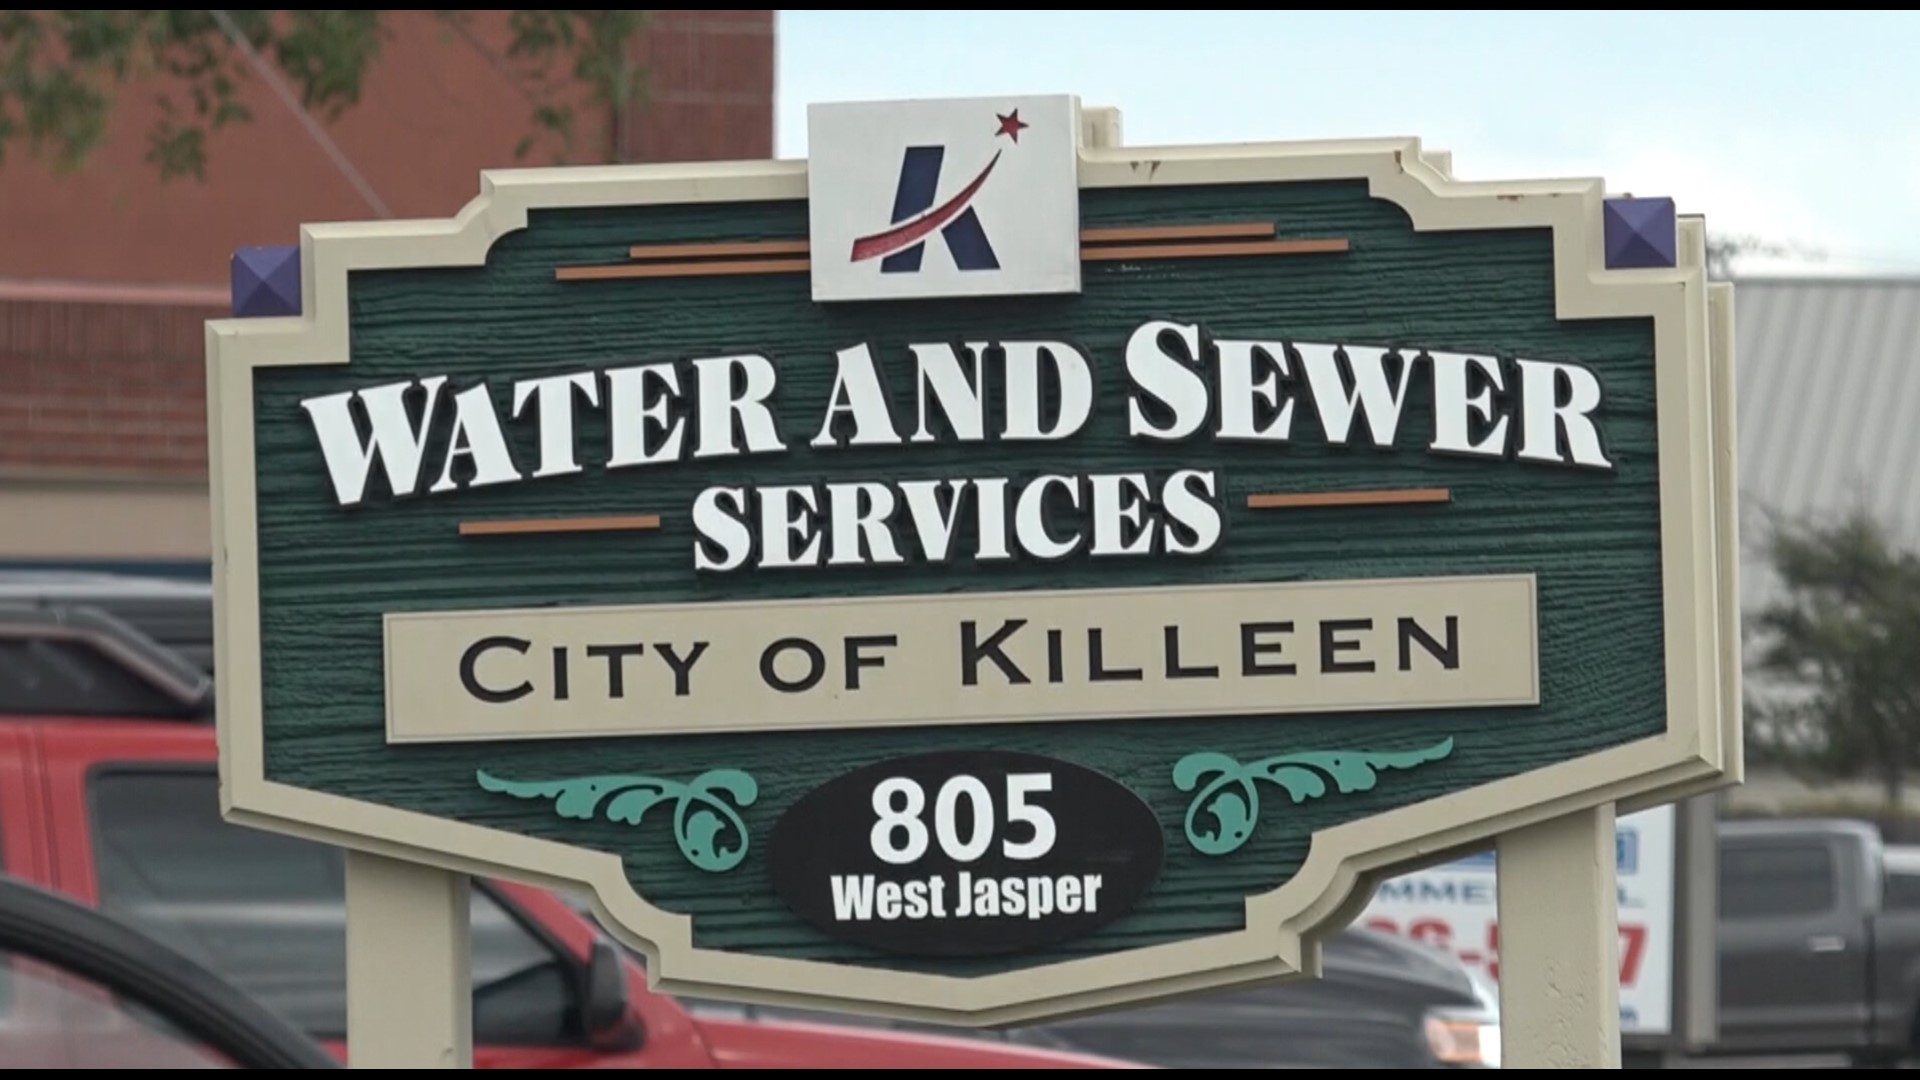 These Killeen properties need to boil water until further notice